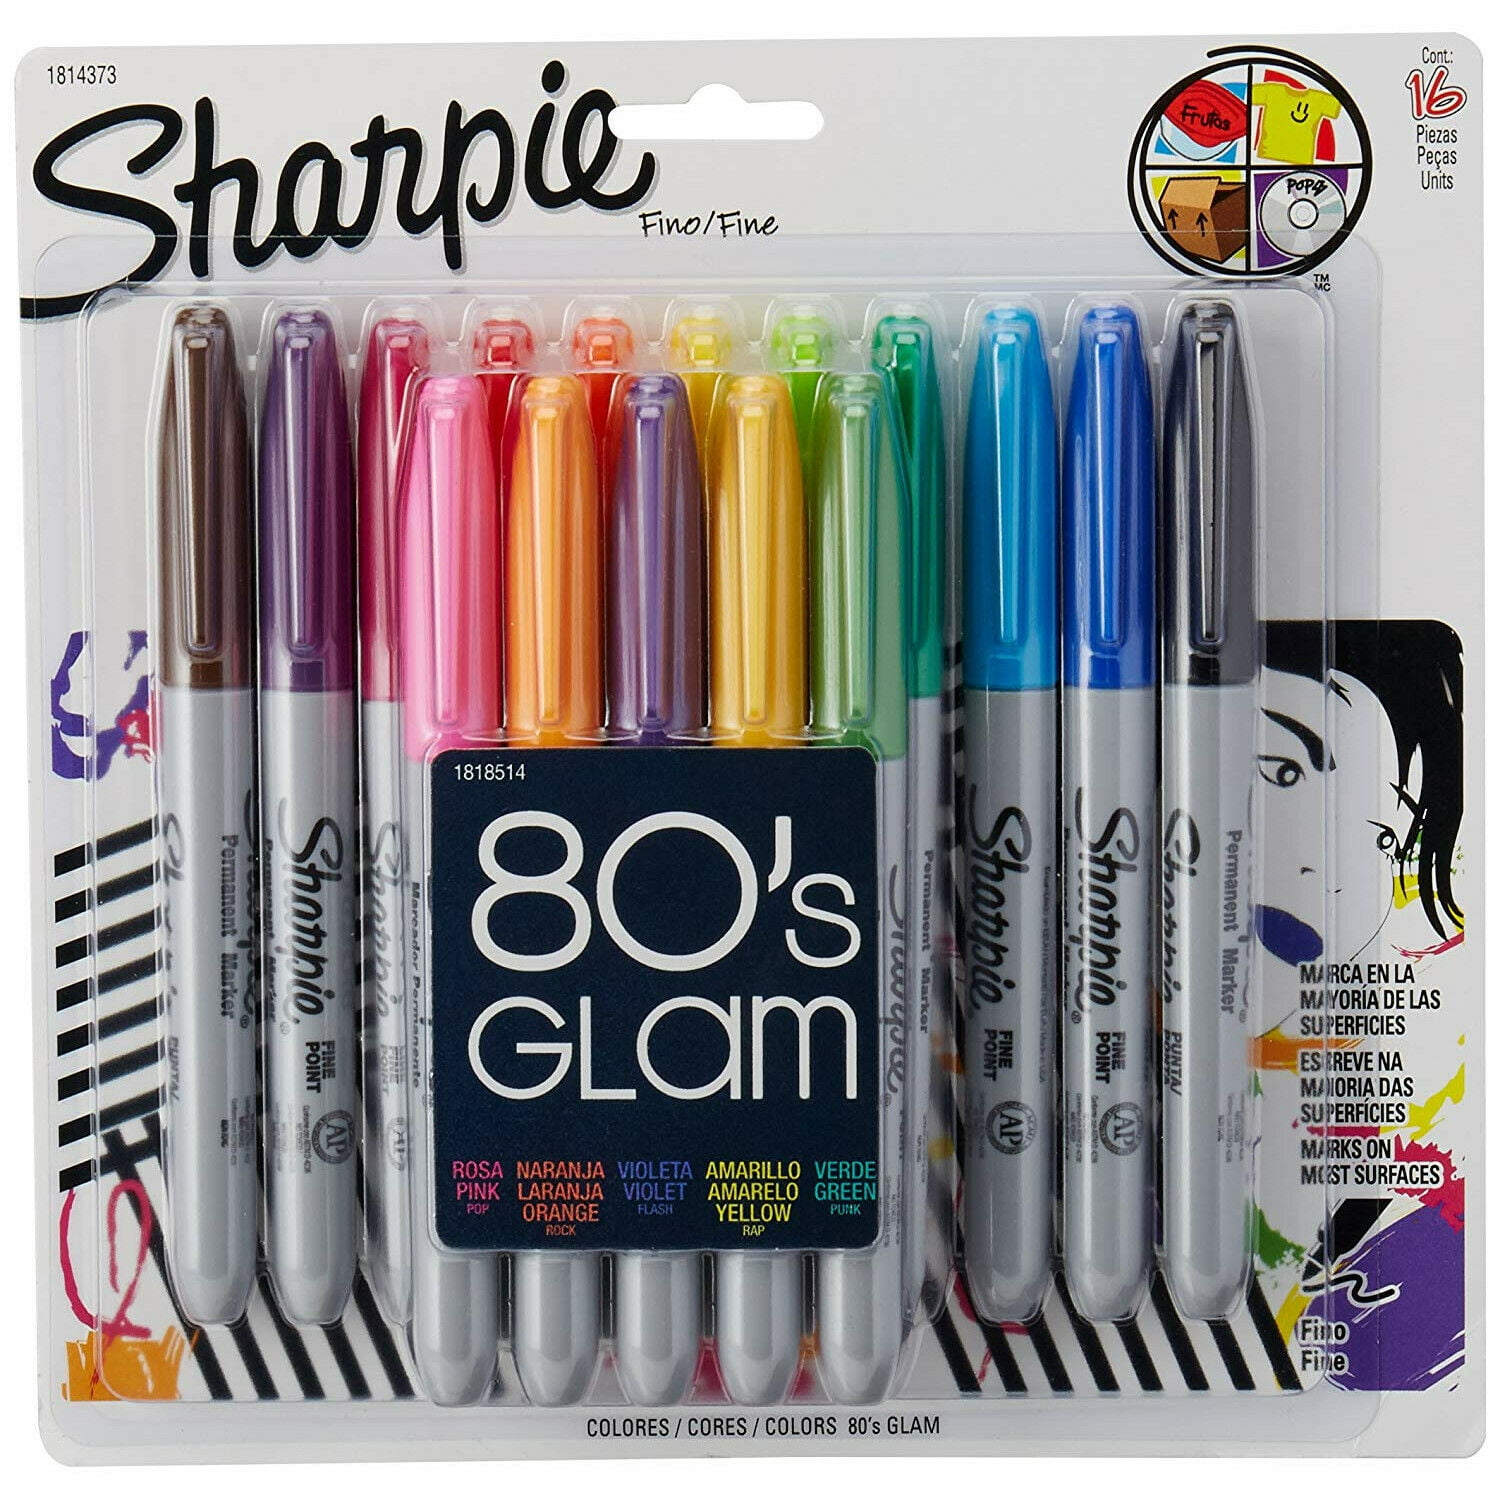 Sharpie 80's Glam Permanent Markers, Fine Point, Assorted Colors, 16 ...